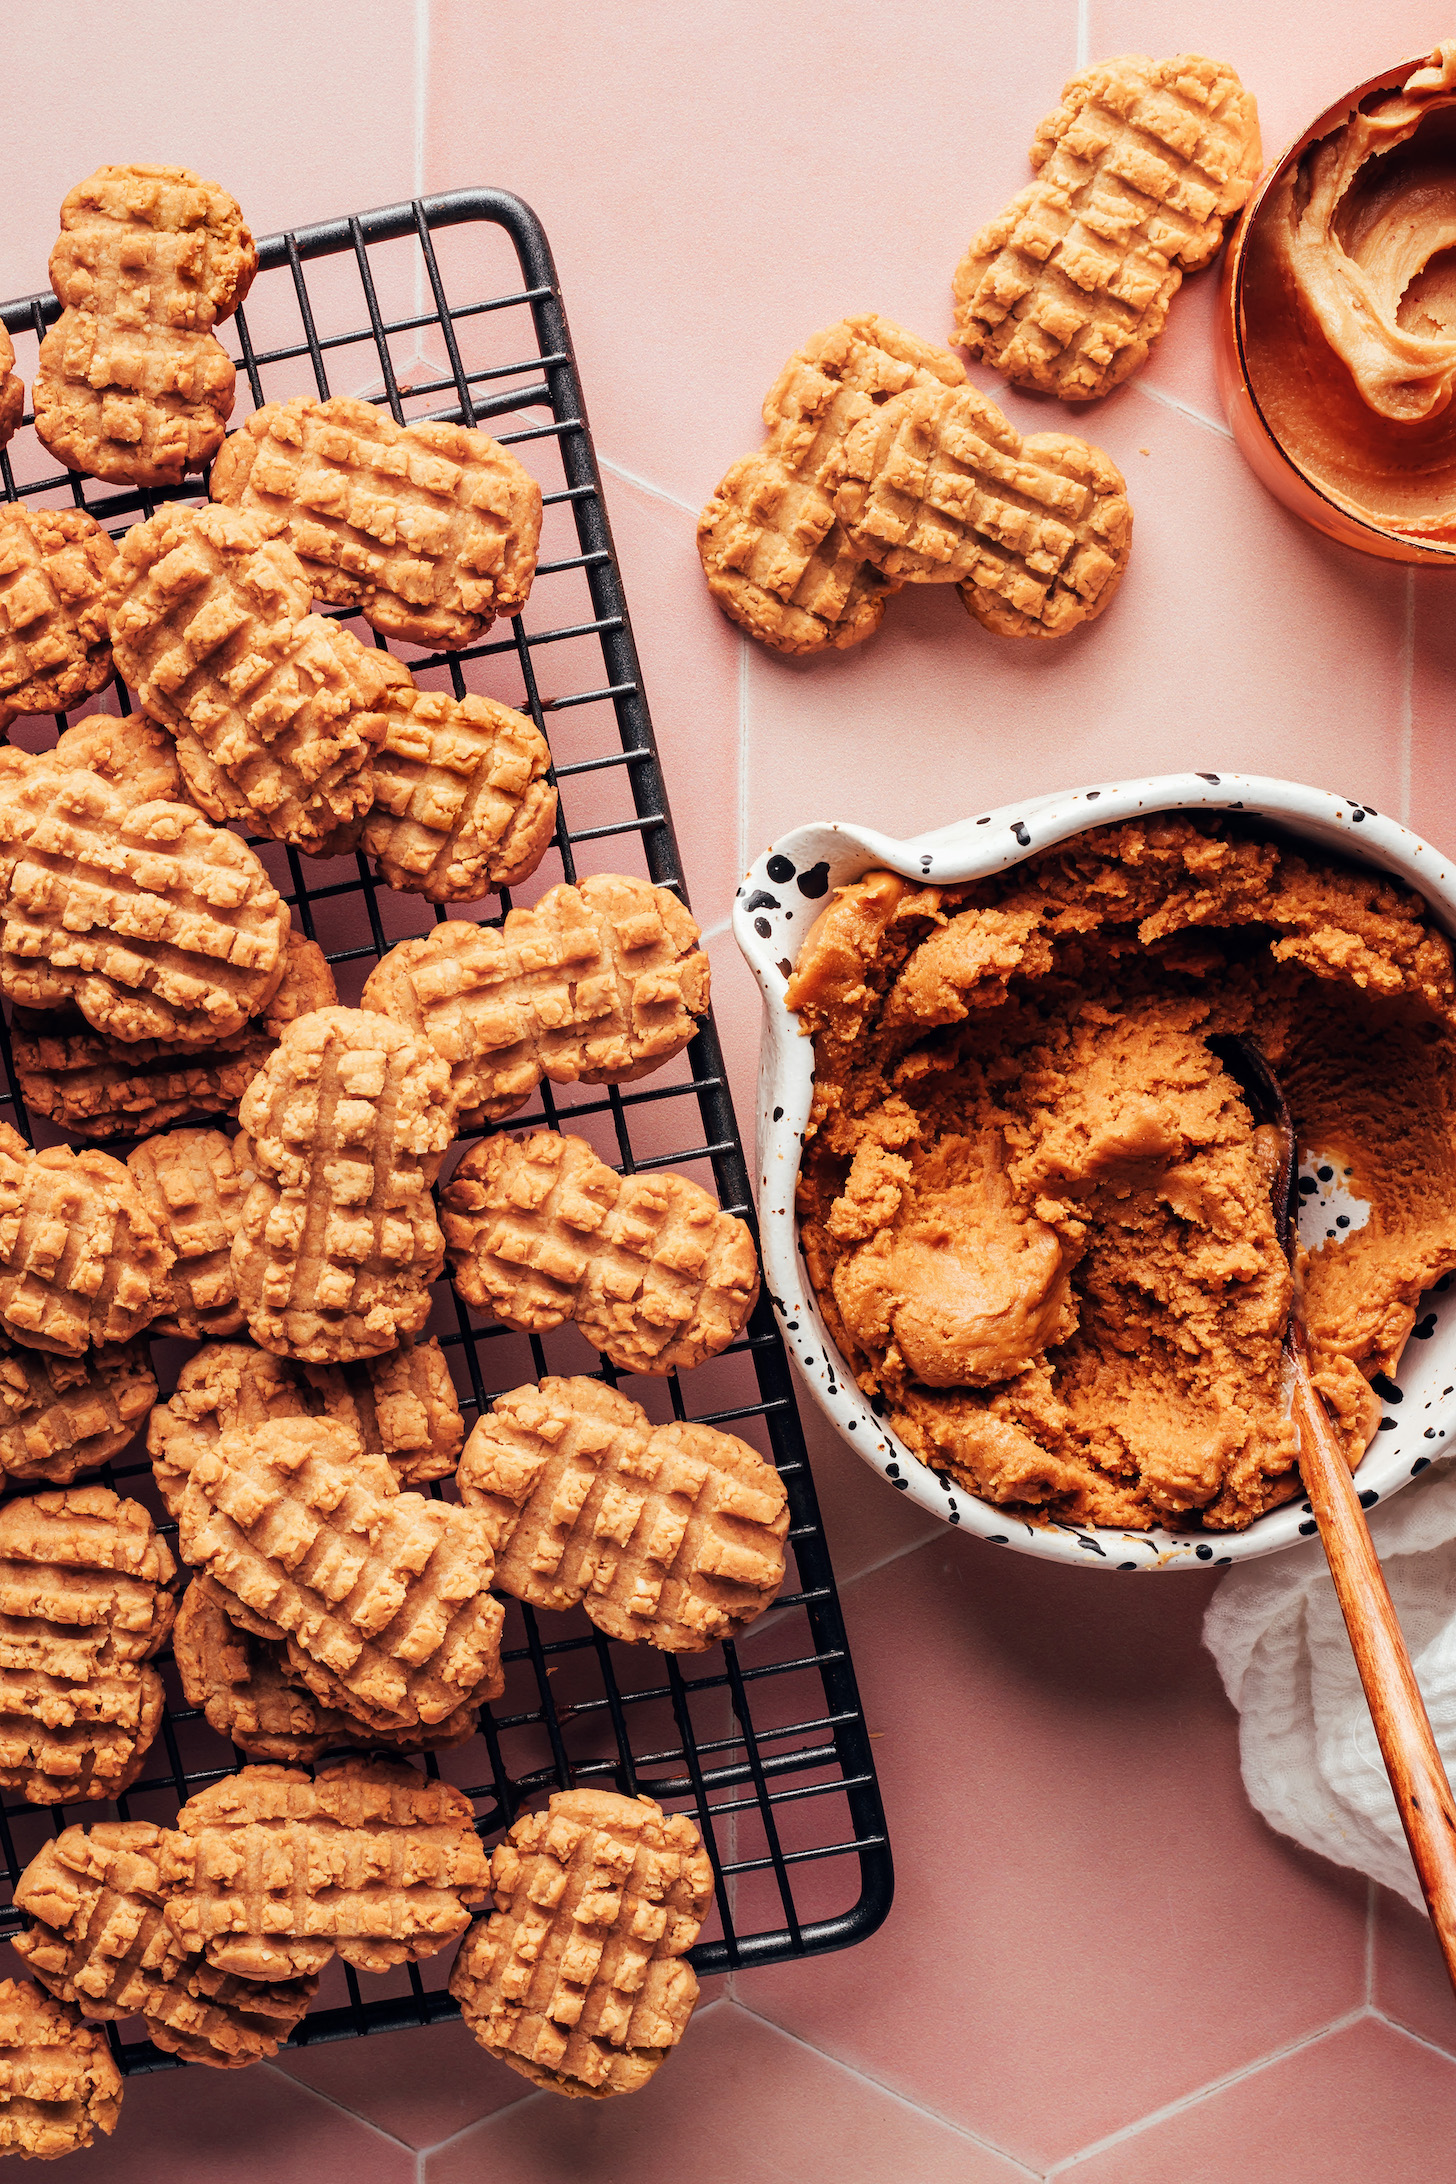 To make peanut butter cookies and filling vegan gluten-free nut butter